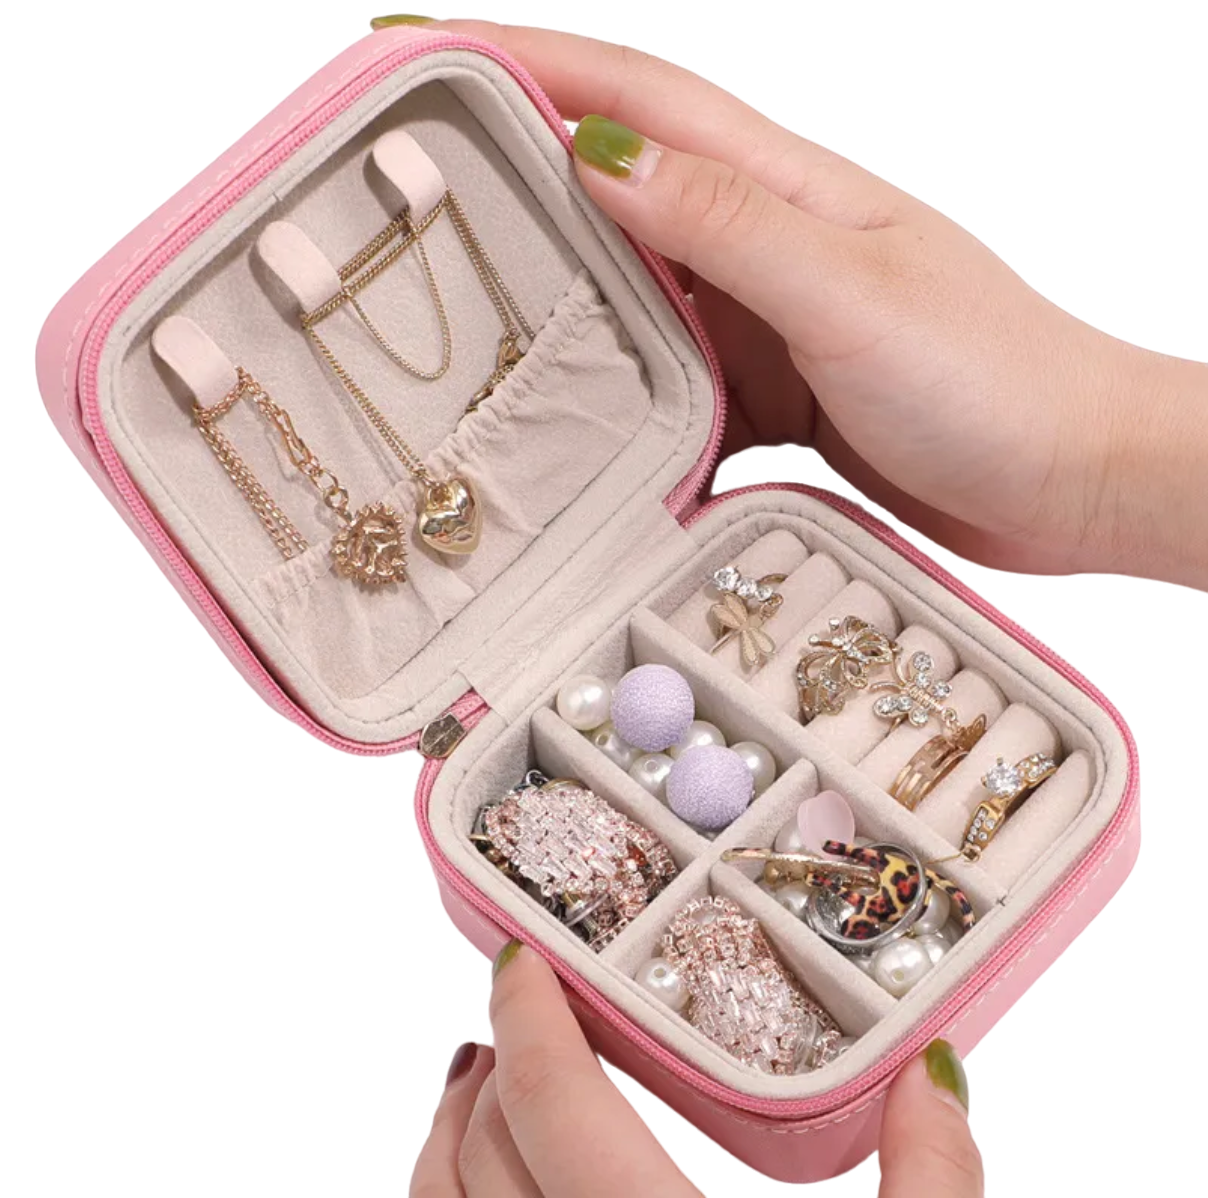 Varsity Collection Small Square Jewelry Travel Case Box